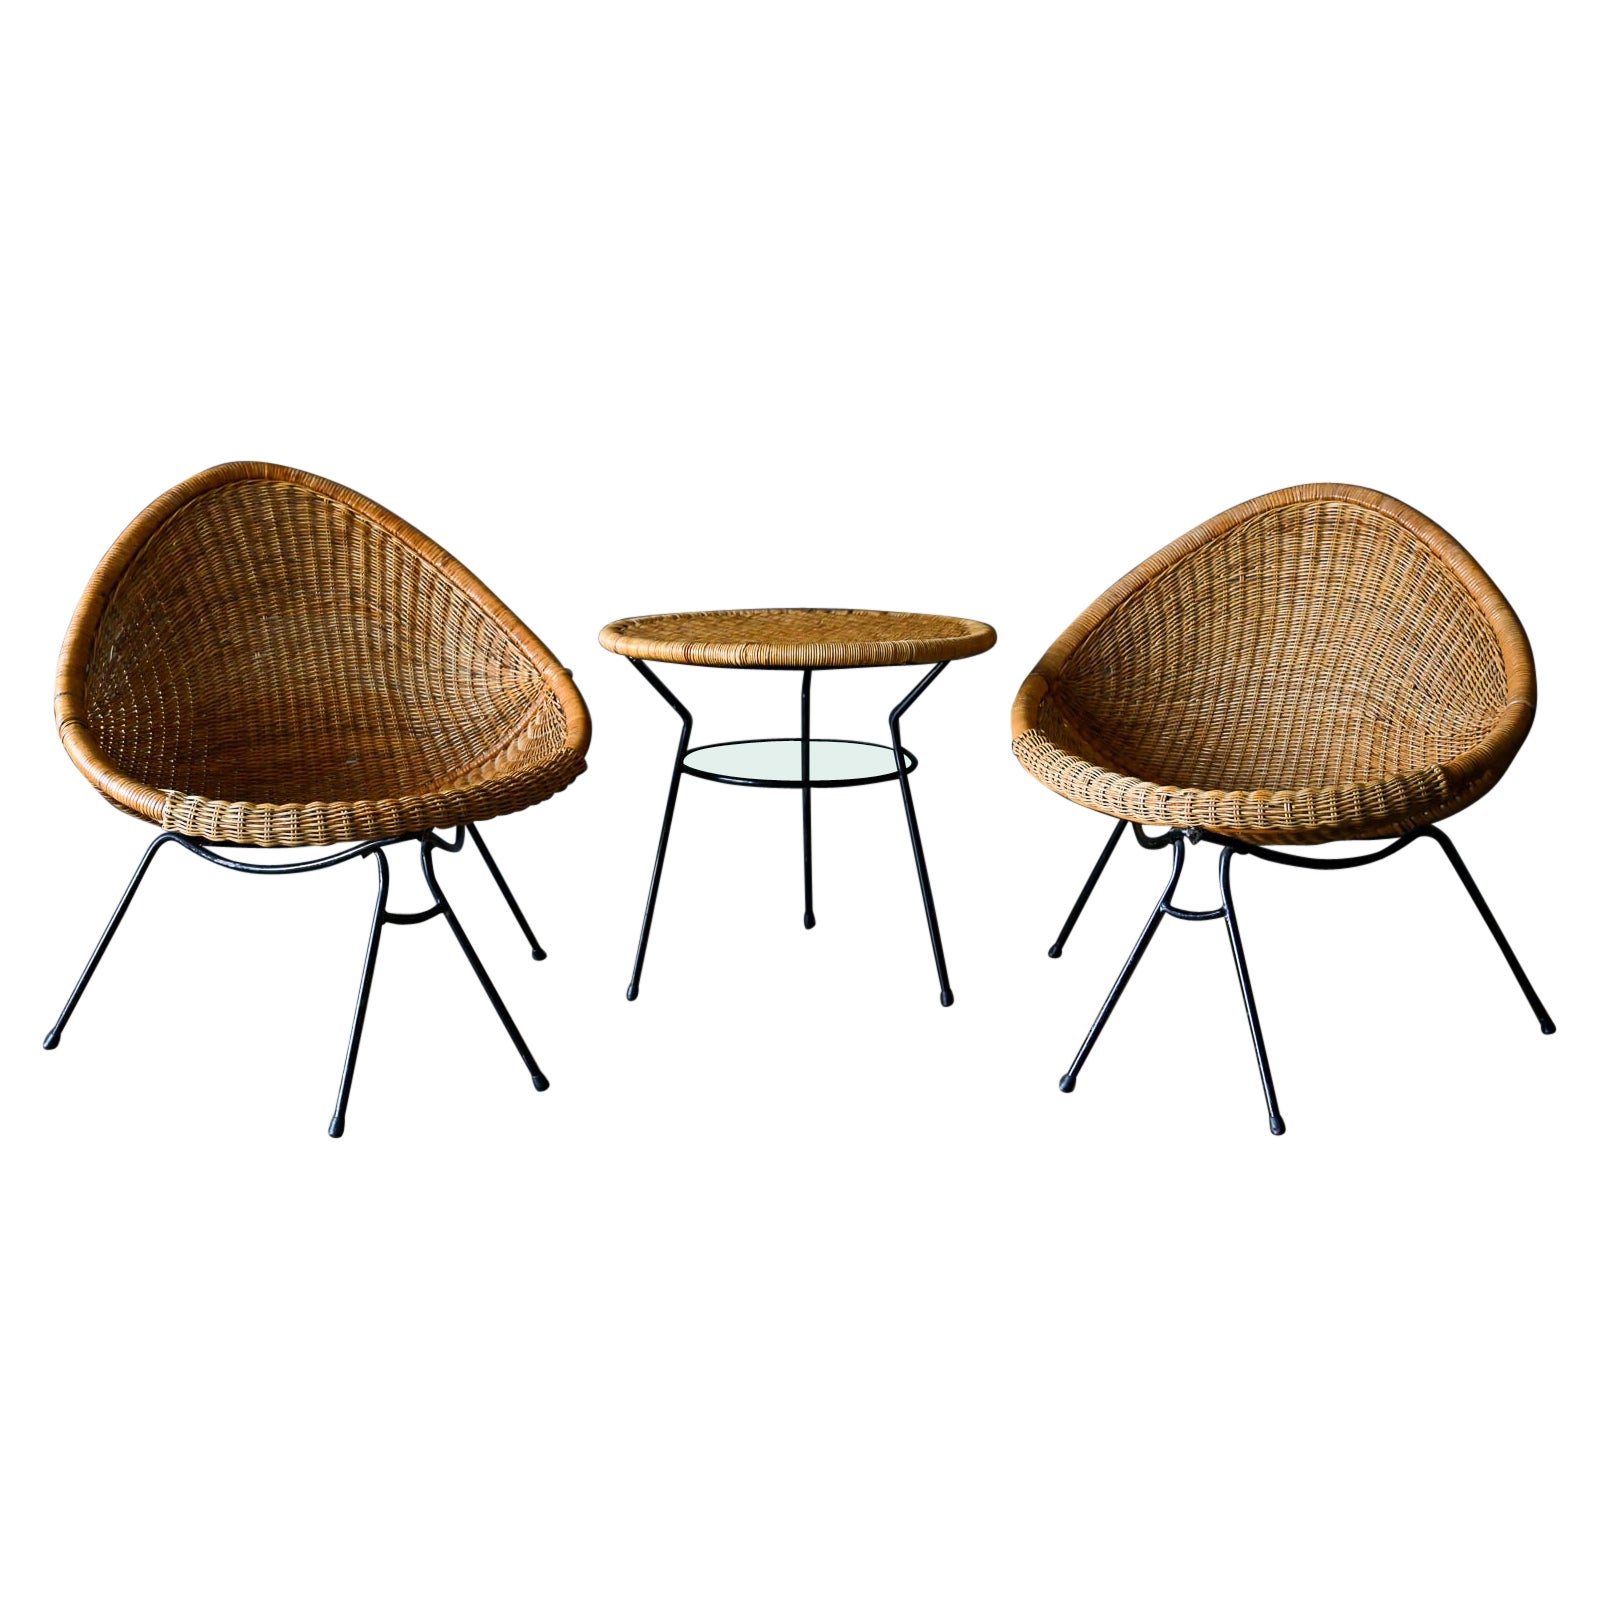 Vintage Italian Rattan and Iron Scoop Chairs and Table, ca. 1950 For Sale